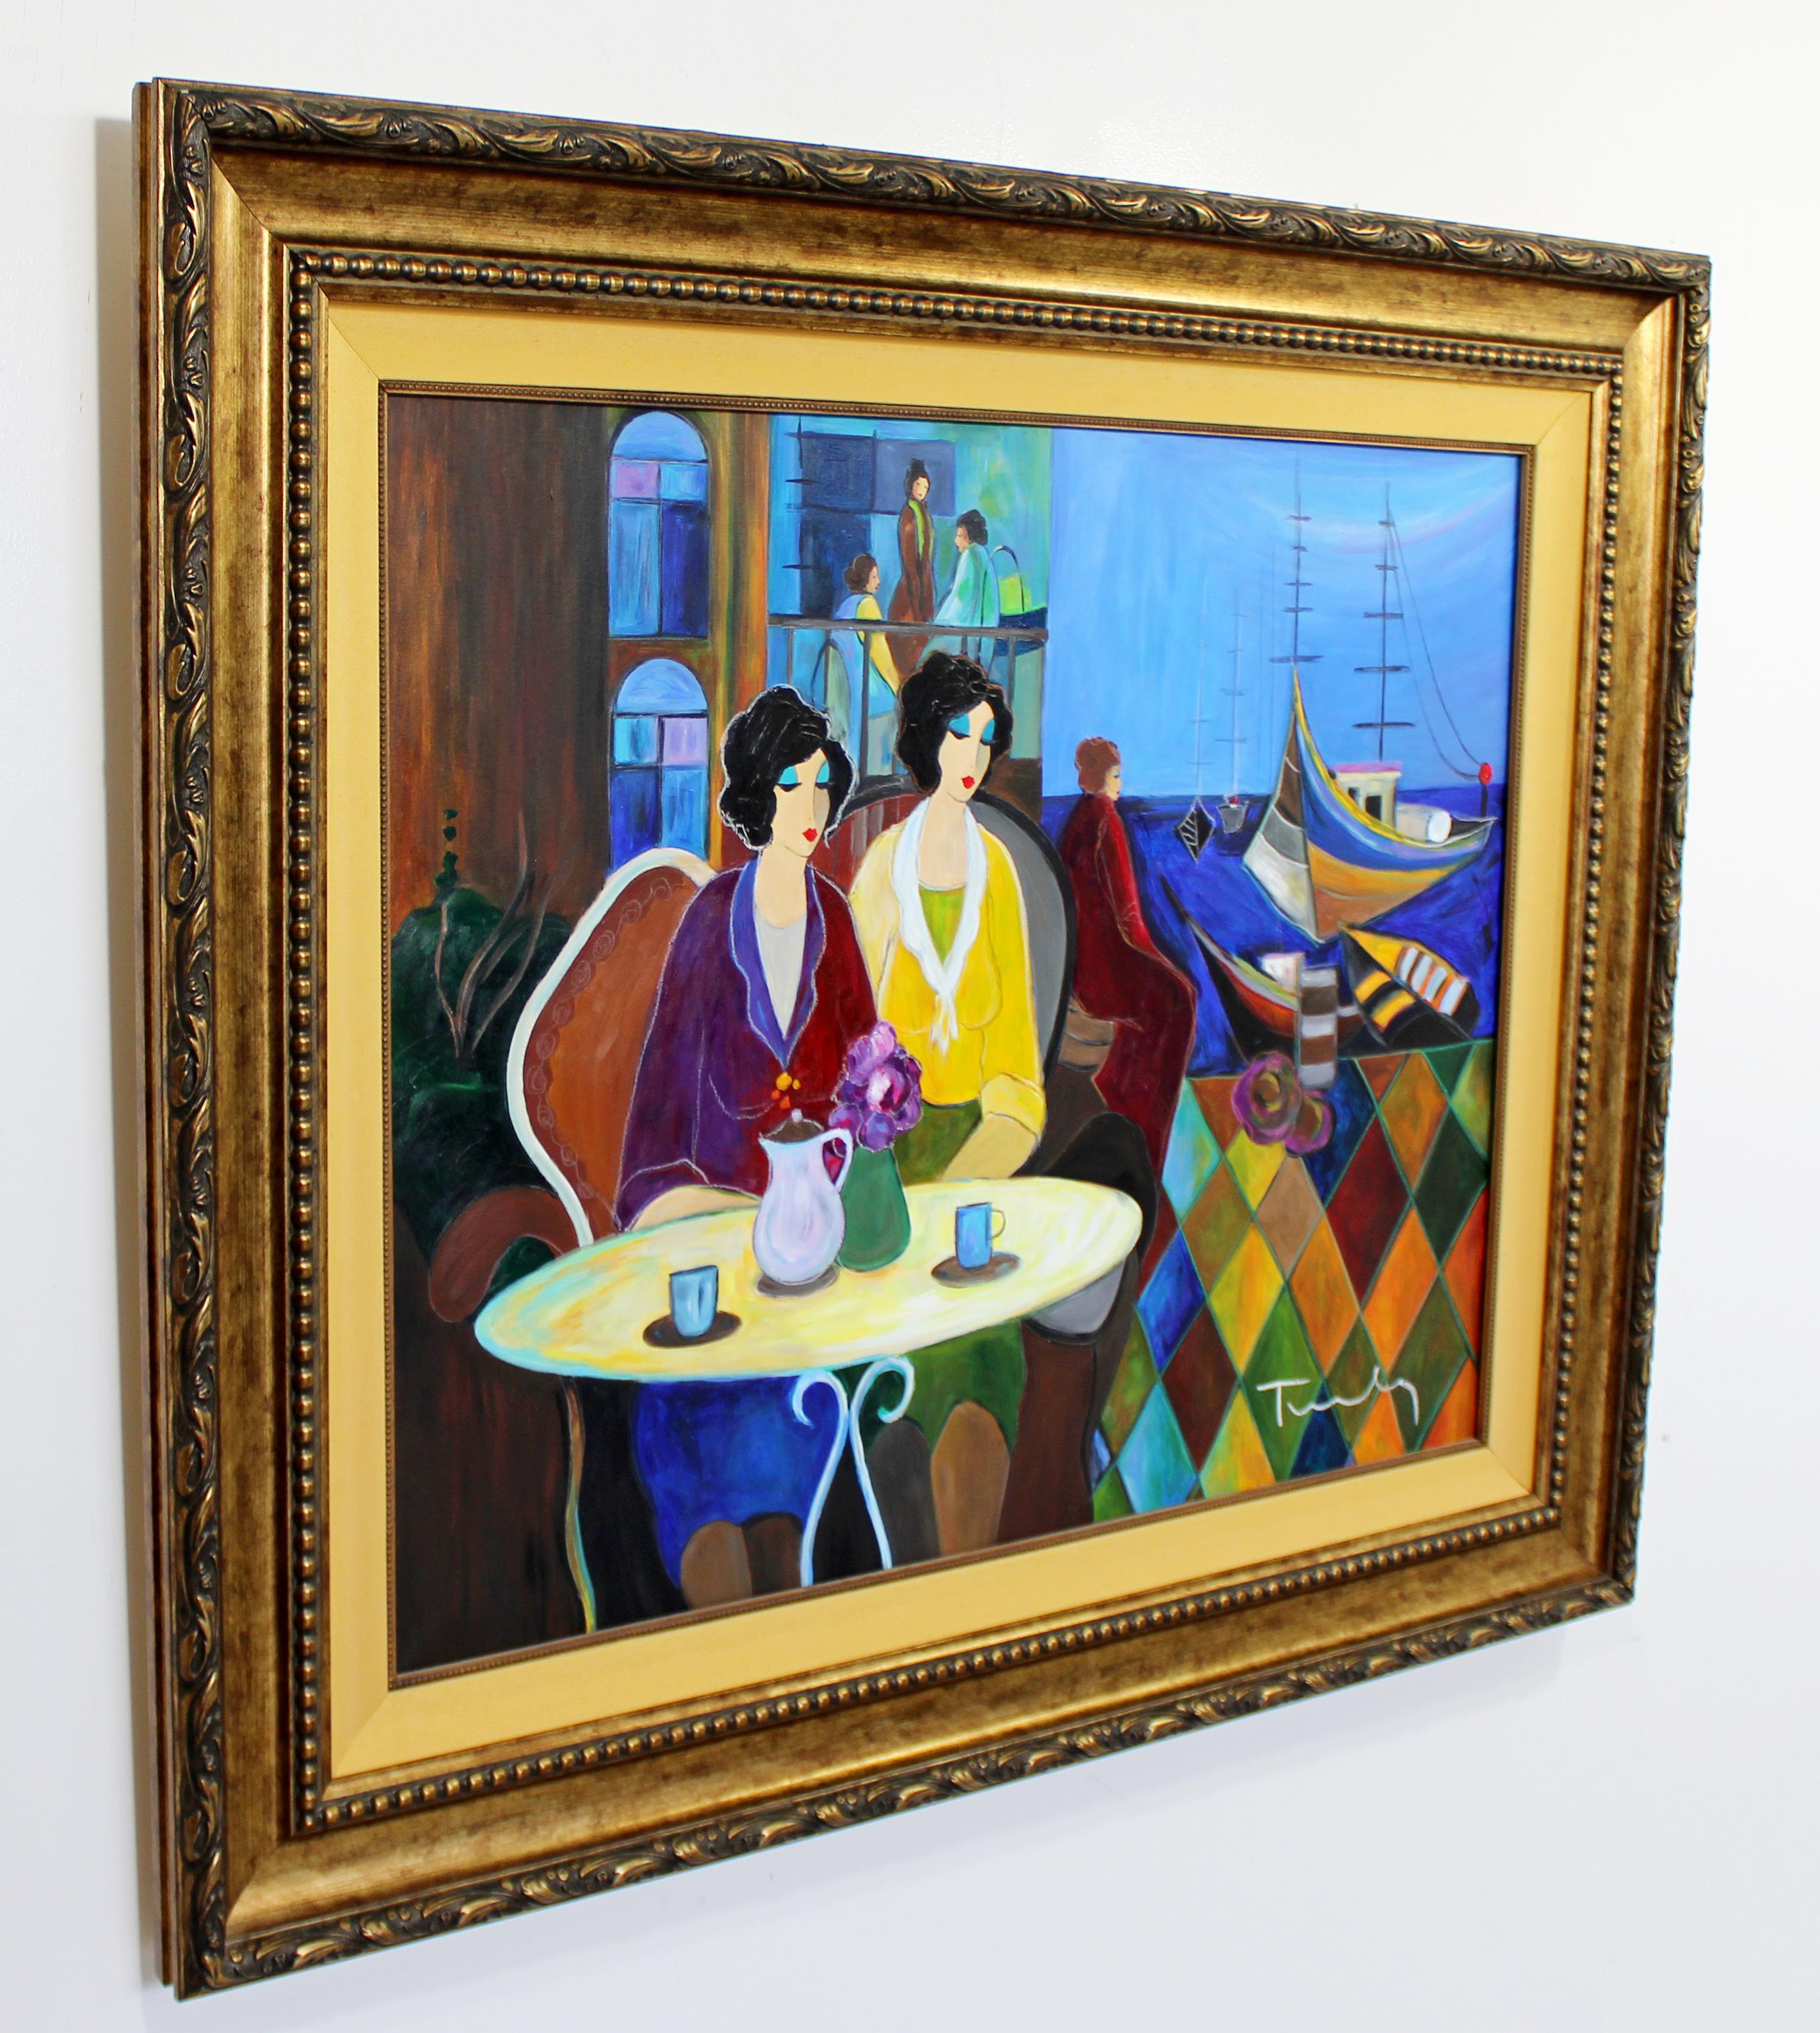 For your consideration is a beautiful, large unique painting with a bay background acrylic on canvas, signed by artist in black frame with gold rope. Itzchak Tarkay is considered to be a key figure in the modern figurative movement. Artwork by the